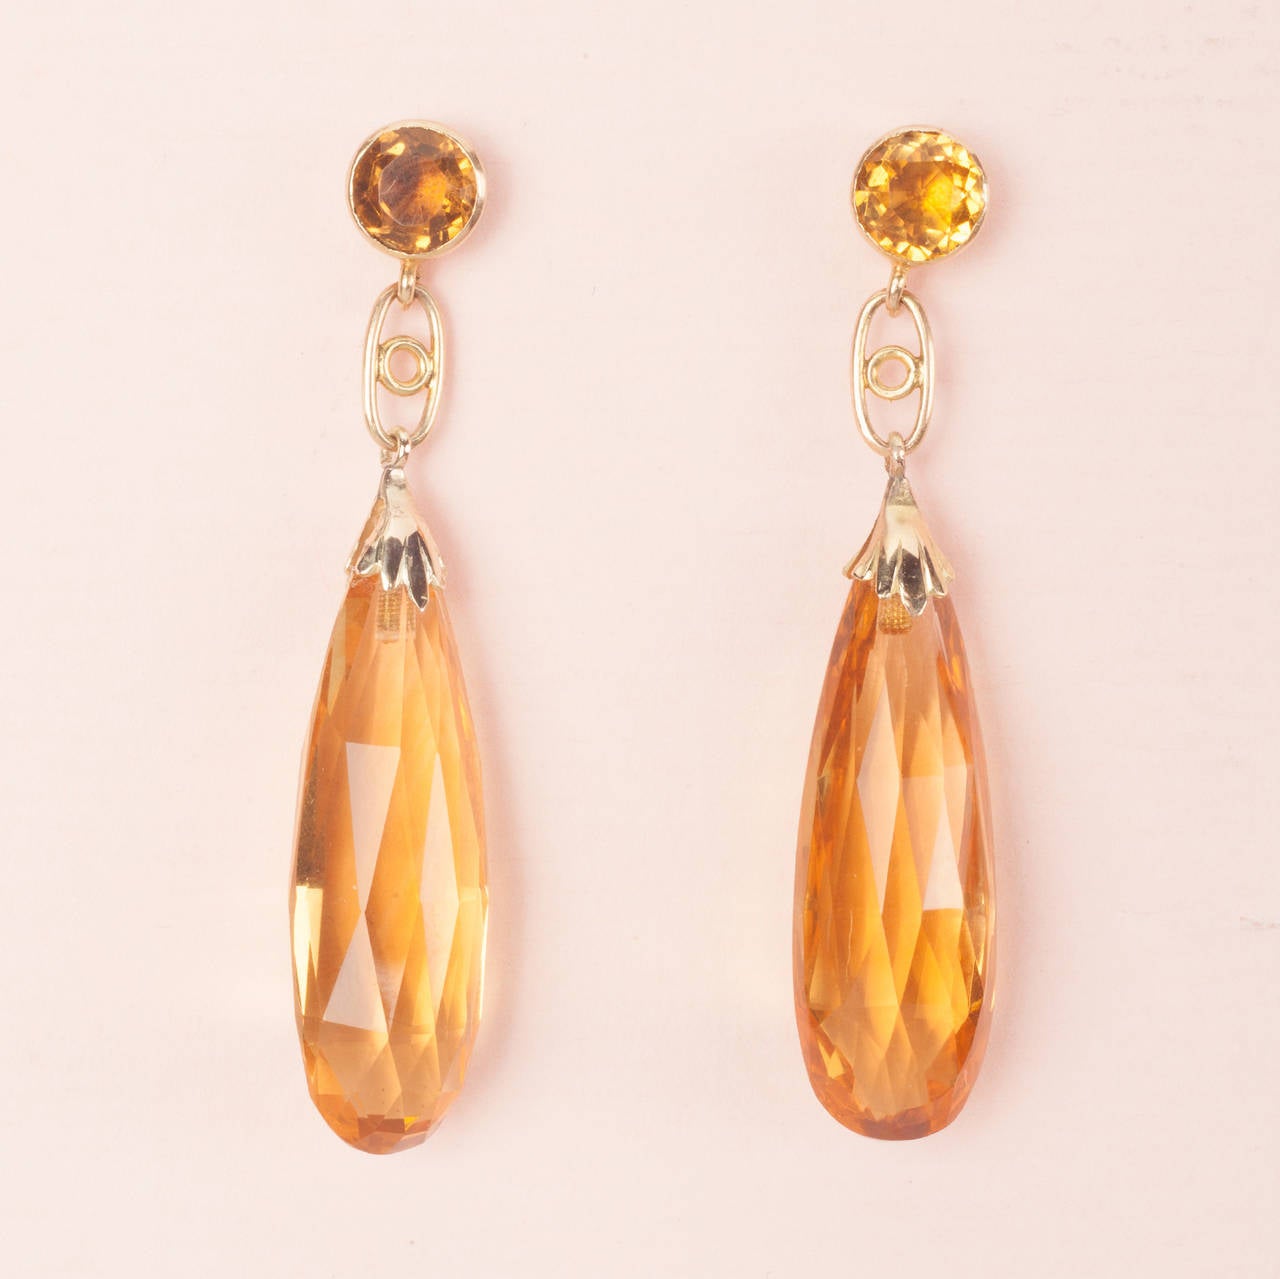 A pair of 15 carat gold and citrine earrings, with on the ear a brilliant cut citrine and long briolette cut citrines below.

England, circa 1910.

weight: 9.8 grams
dimensions: 5.4 x 1 cm.